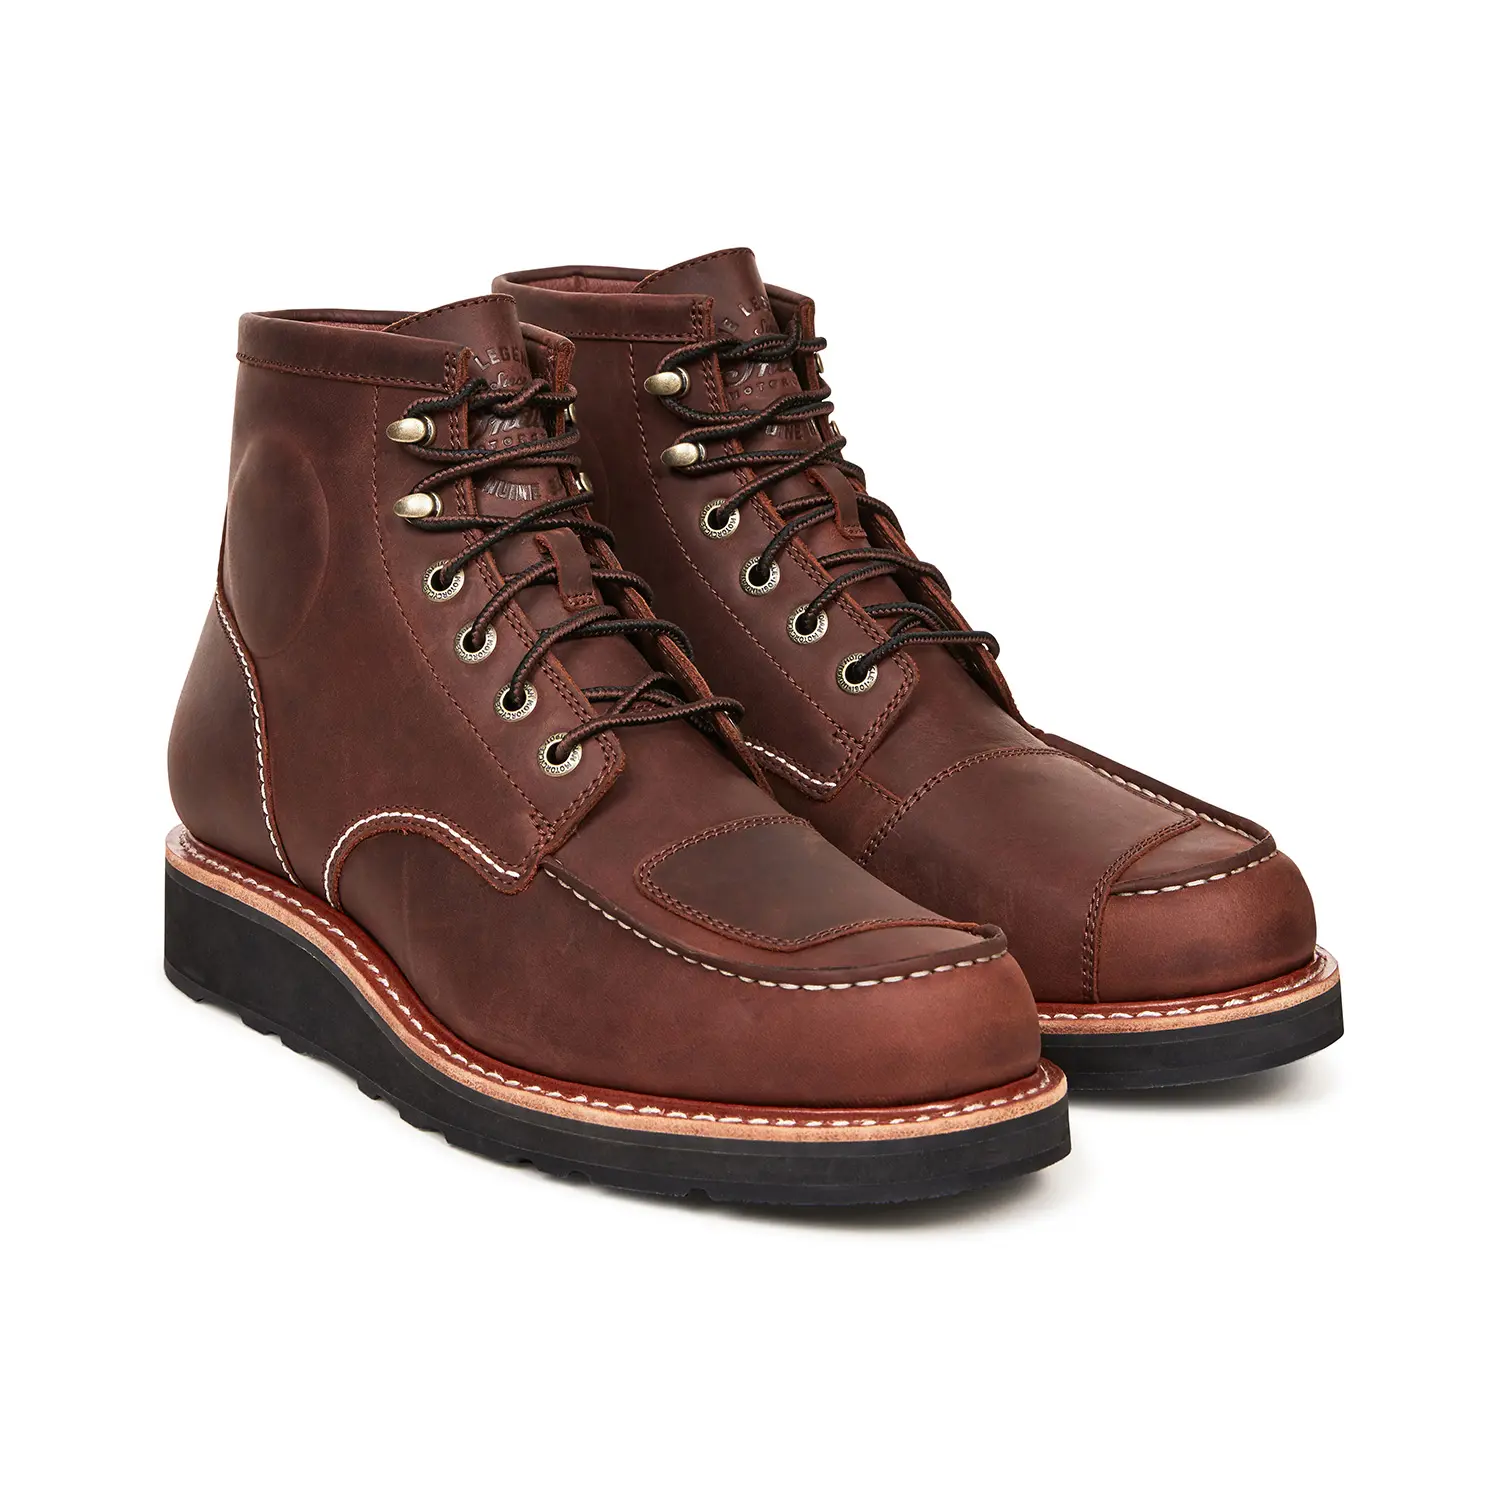 READY STOCK!!! Red wing shoes lace keepers Buckle lace, Men's